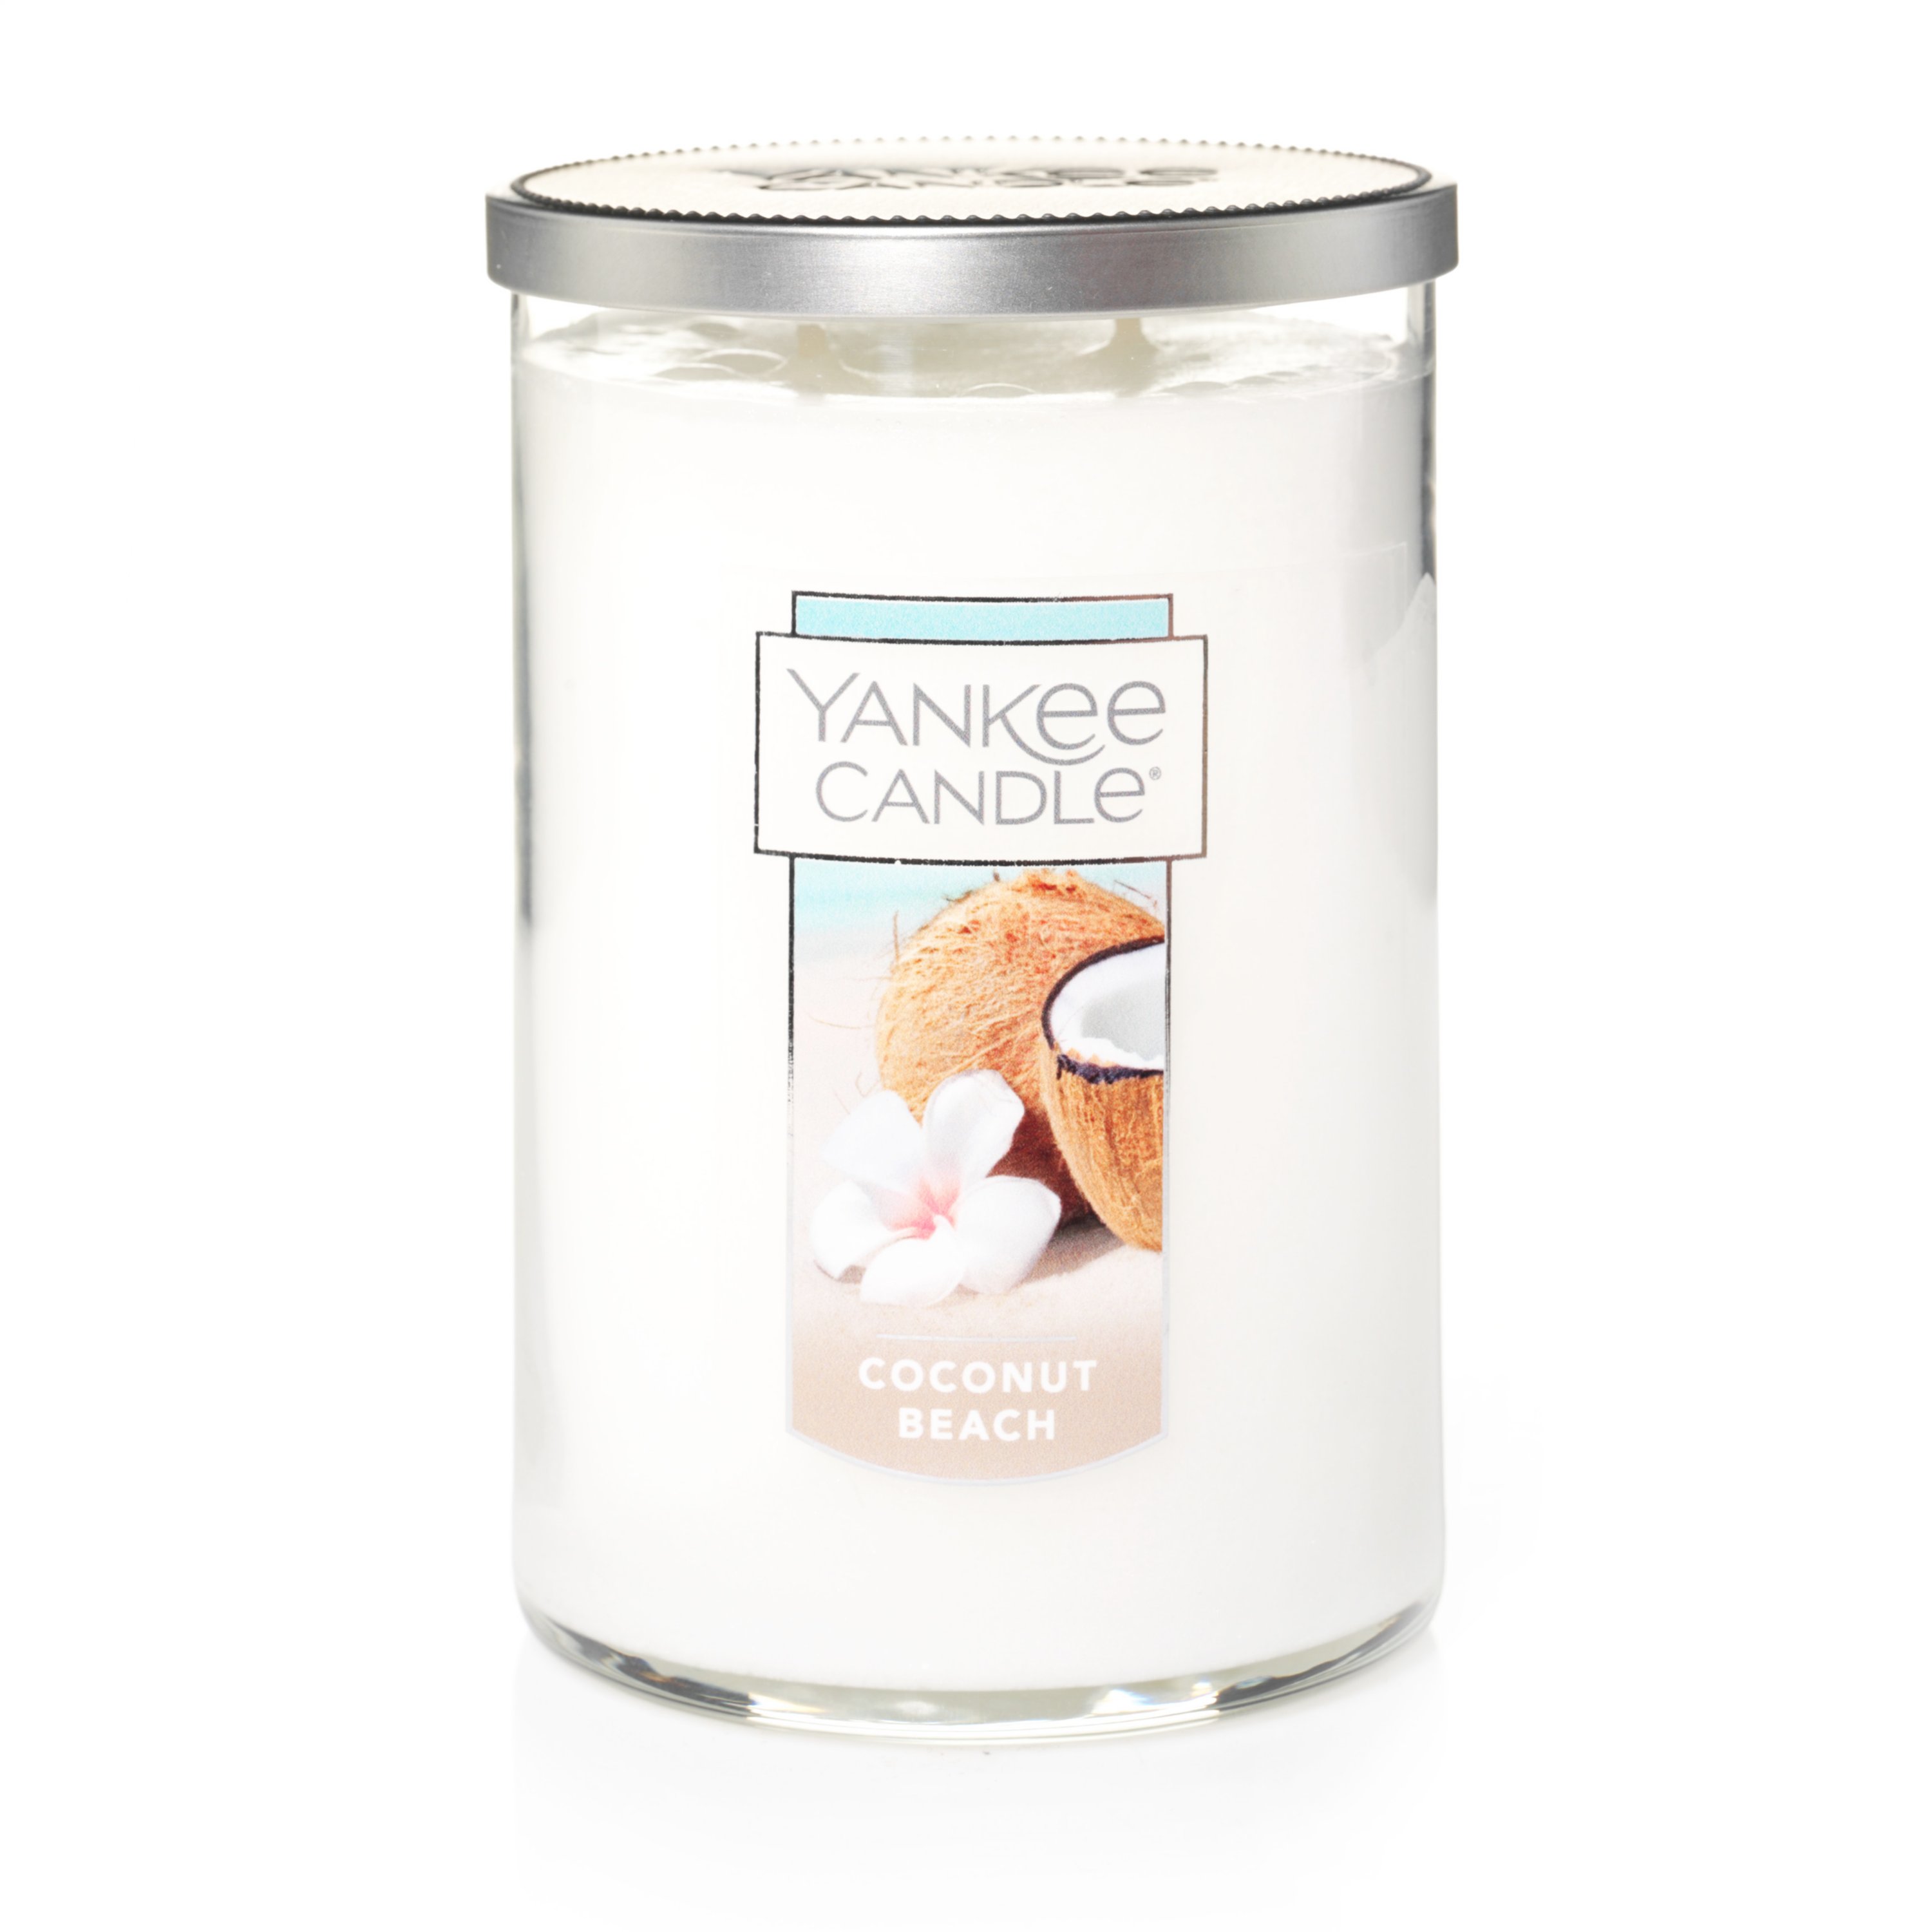 Yankee Candle Wax Melt Coconut Beach - Scented Wax Melts